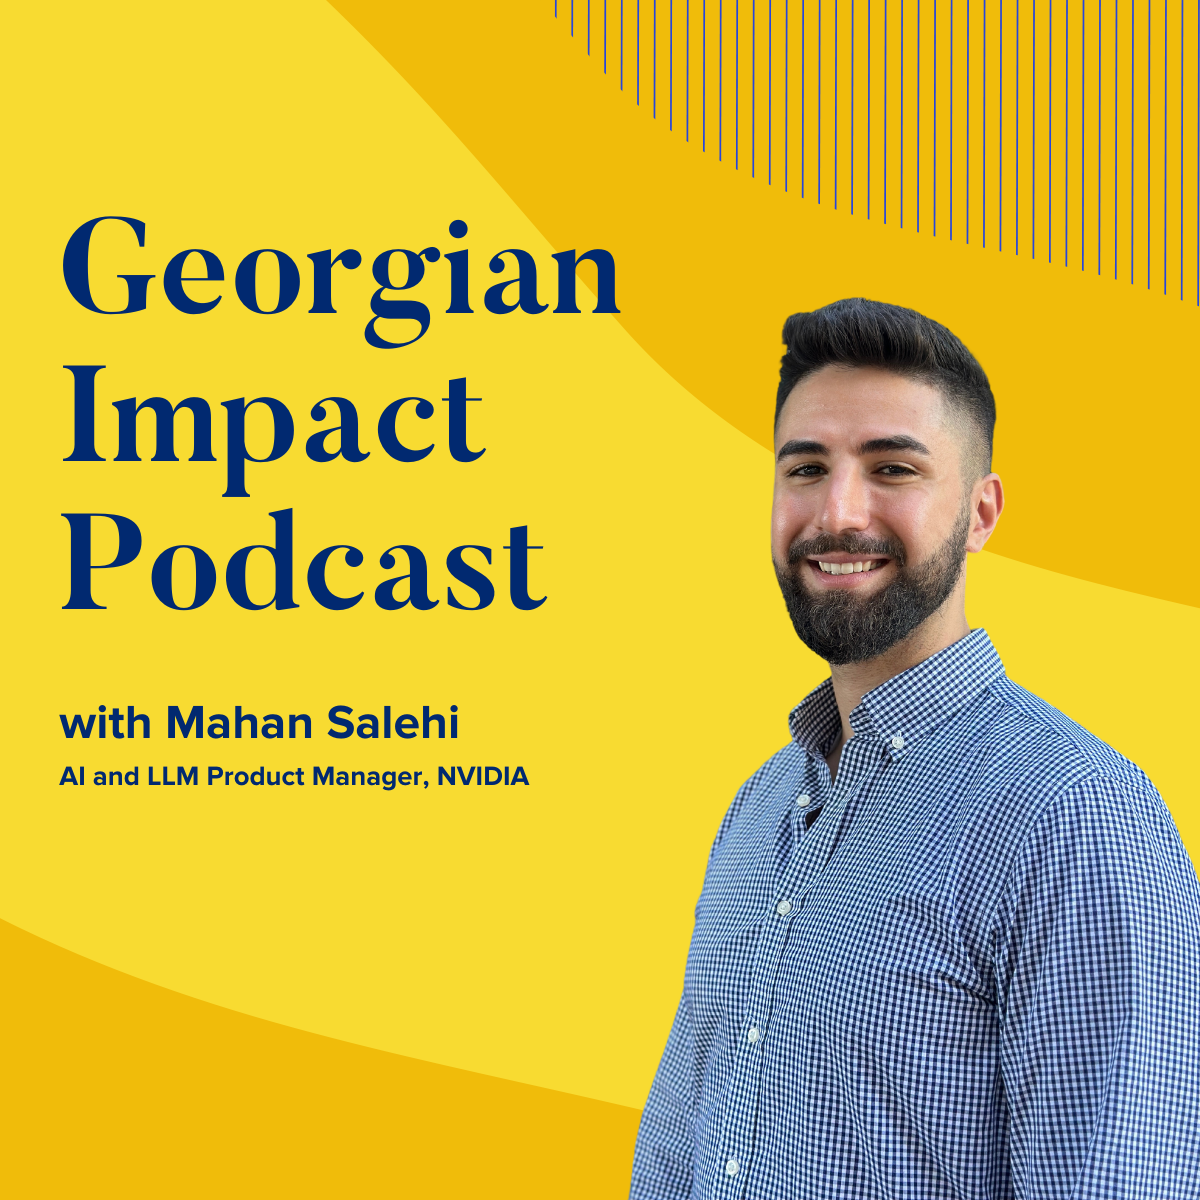 Georgian impact podcast graphic with a photo of Mahan Salehi AI and LLM Product Manager of NVIDIA